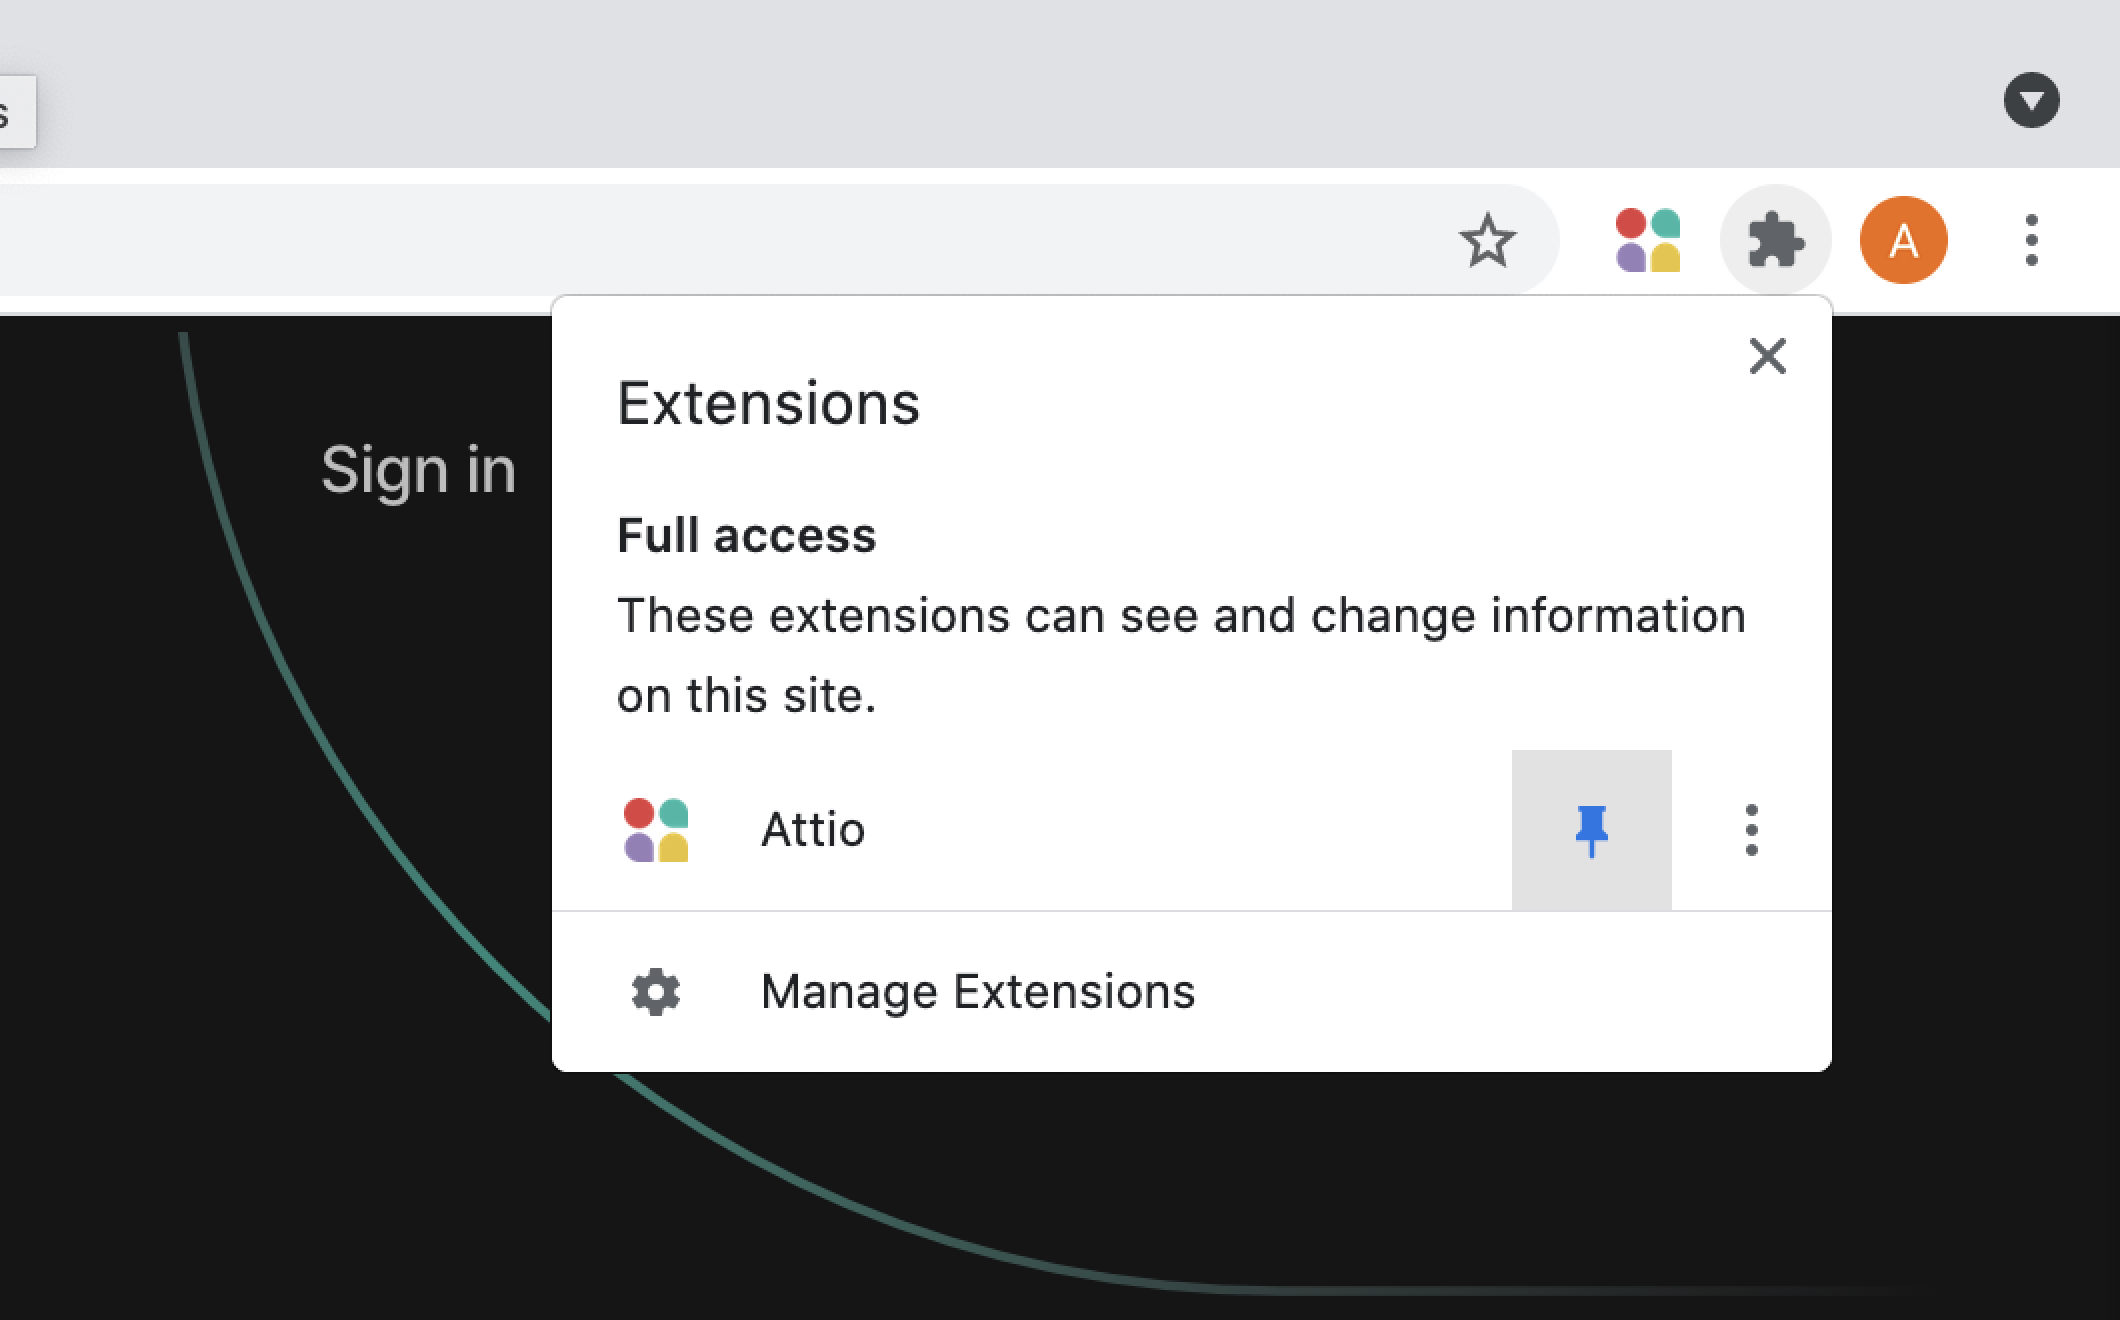 A dropdown in a Chrome browser shows how to pin the Attio extension to your toolbar for quick access using the pushpin icon next to the Attio logo.